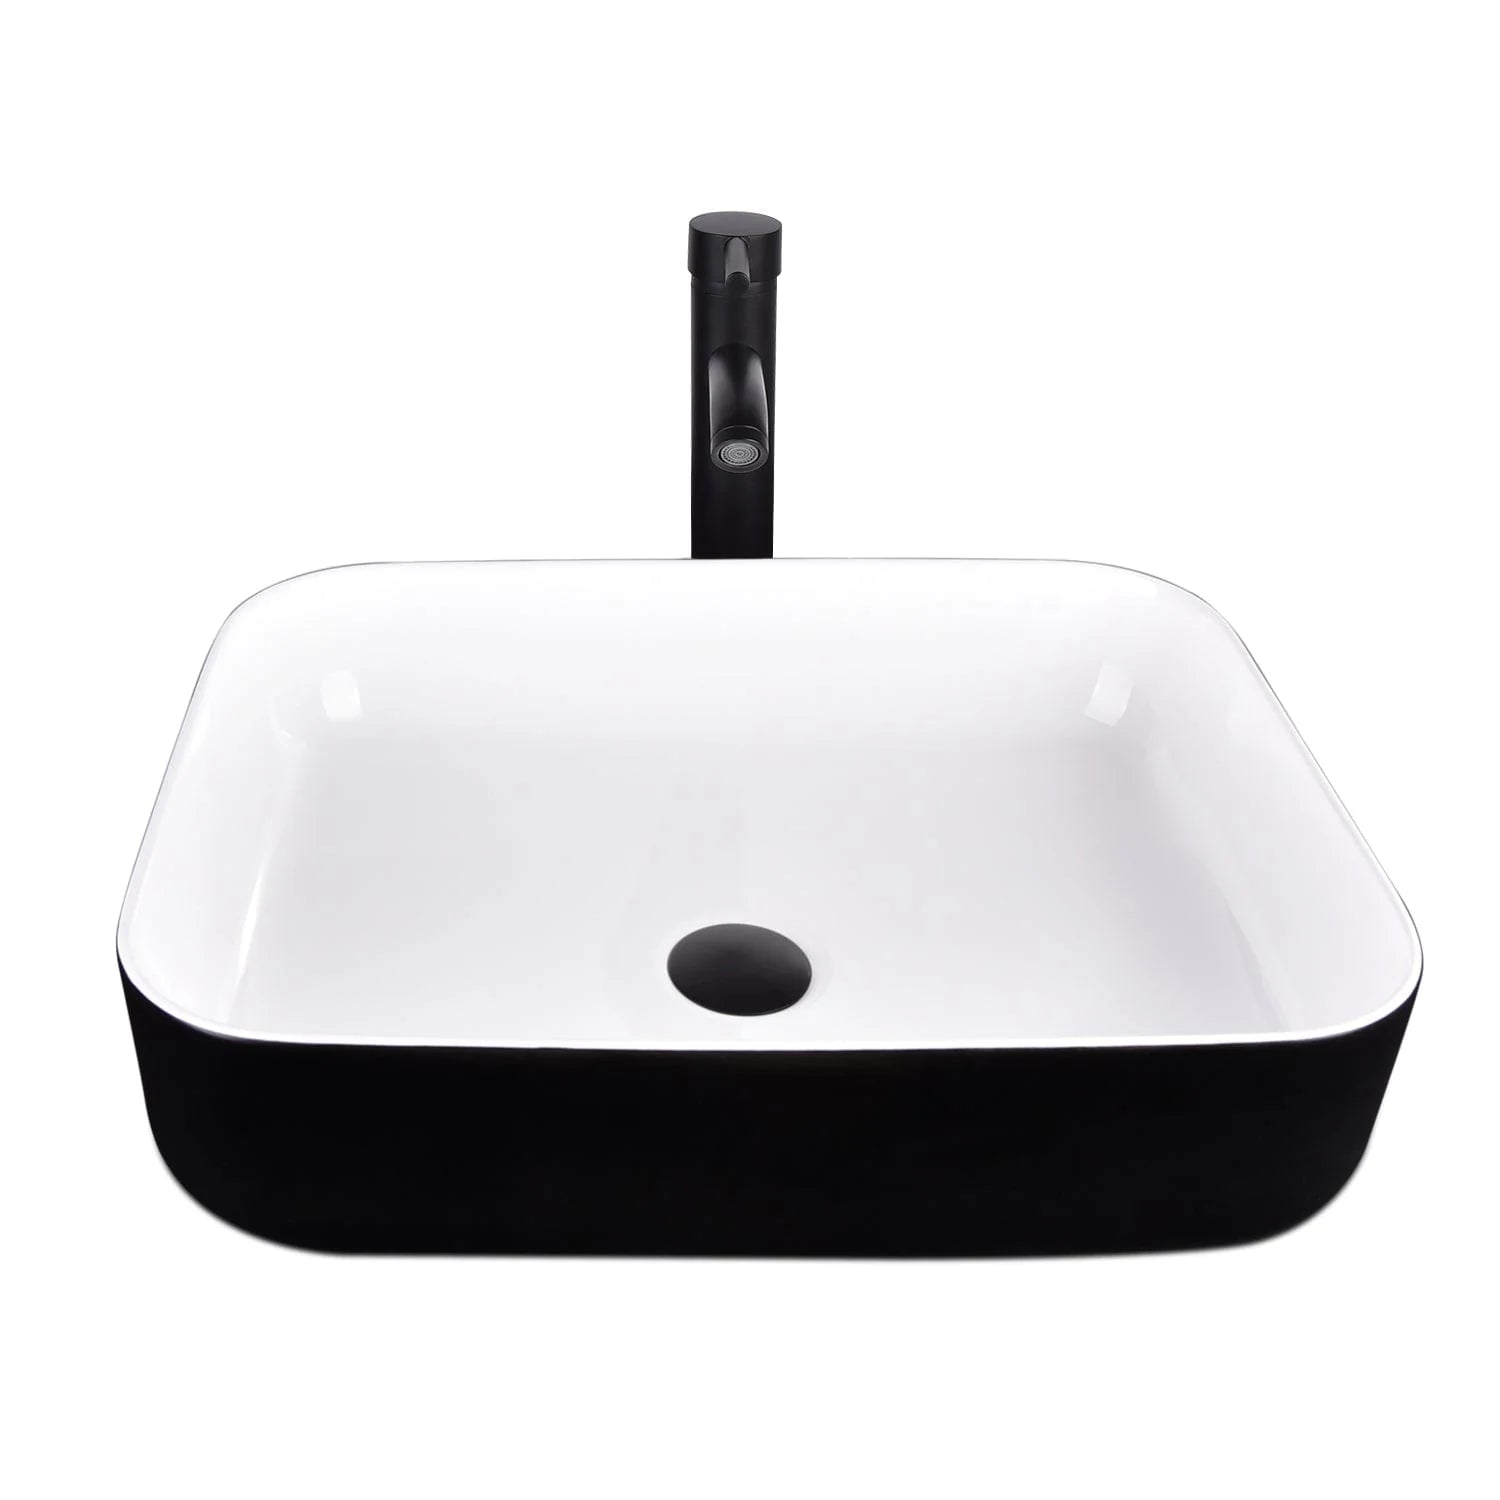 Elecwish black ceramic sink with faucet